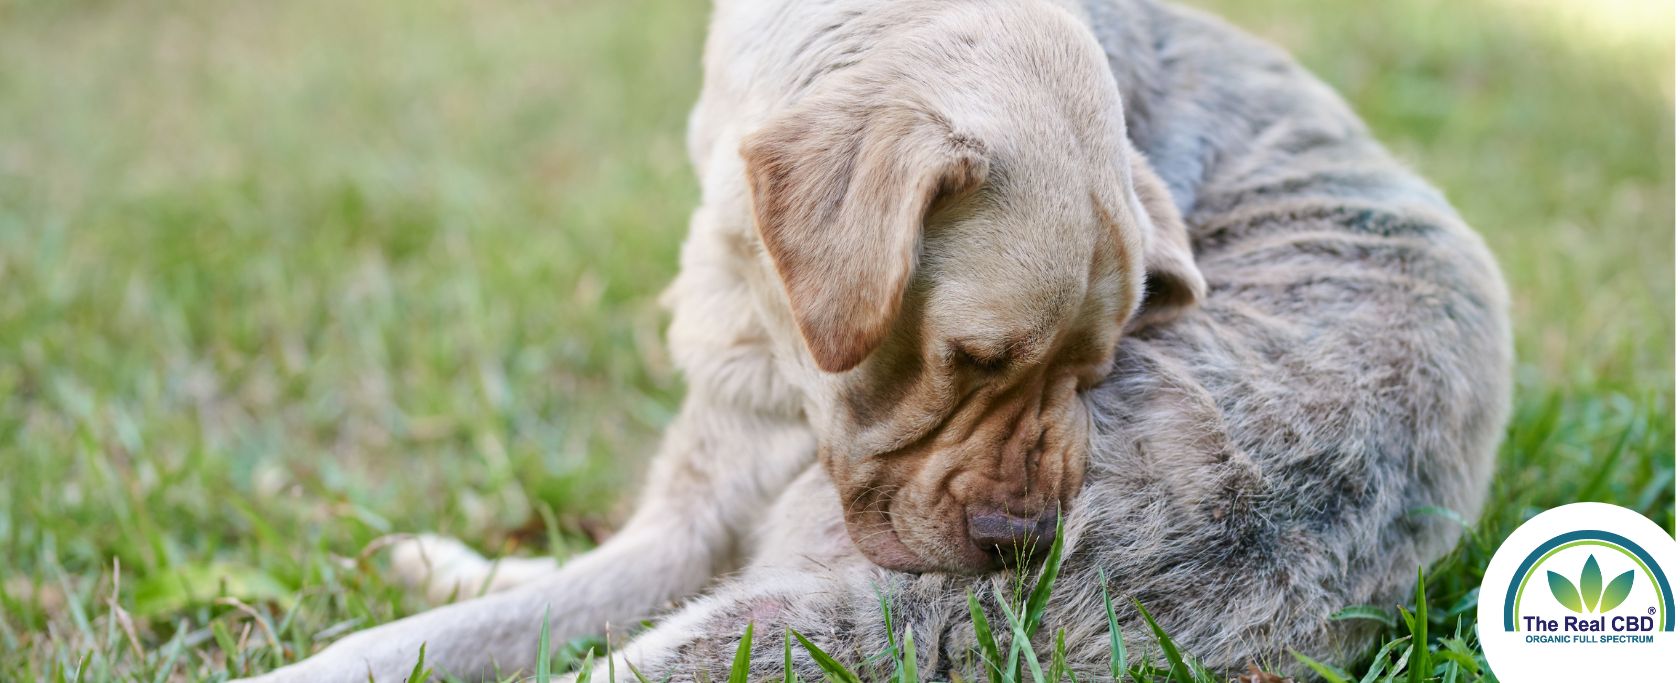 The-Real-CBD-Blog-CBD-Oil-for-Cushing's-Disease-in-Dogs